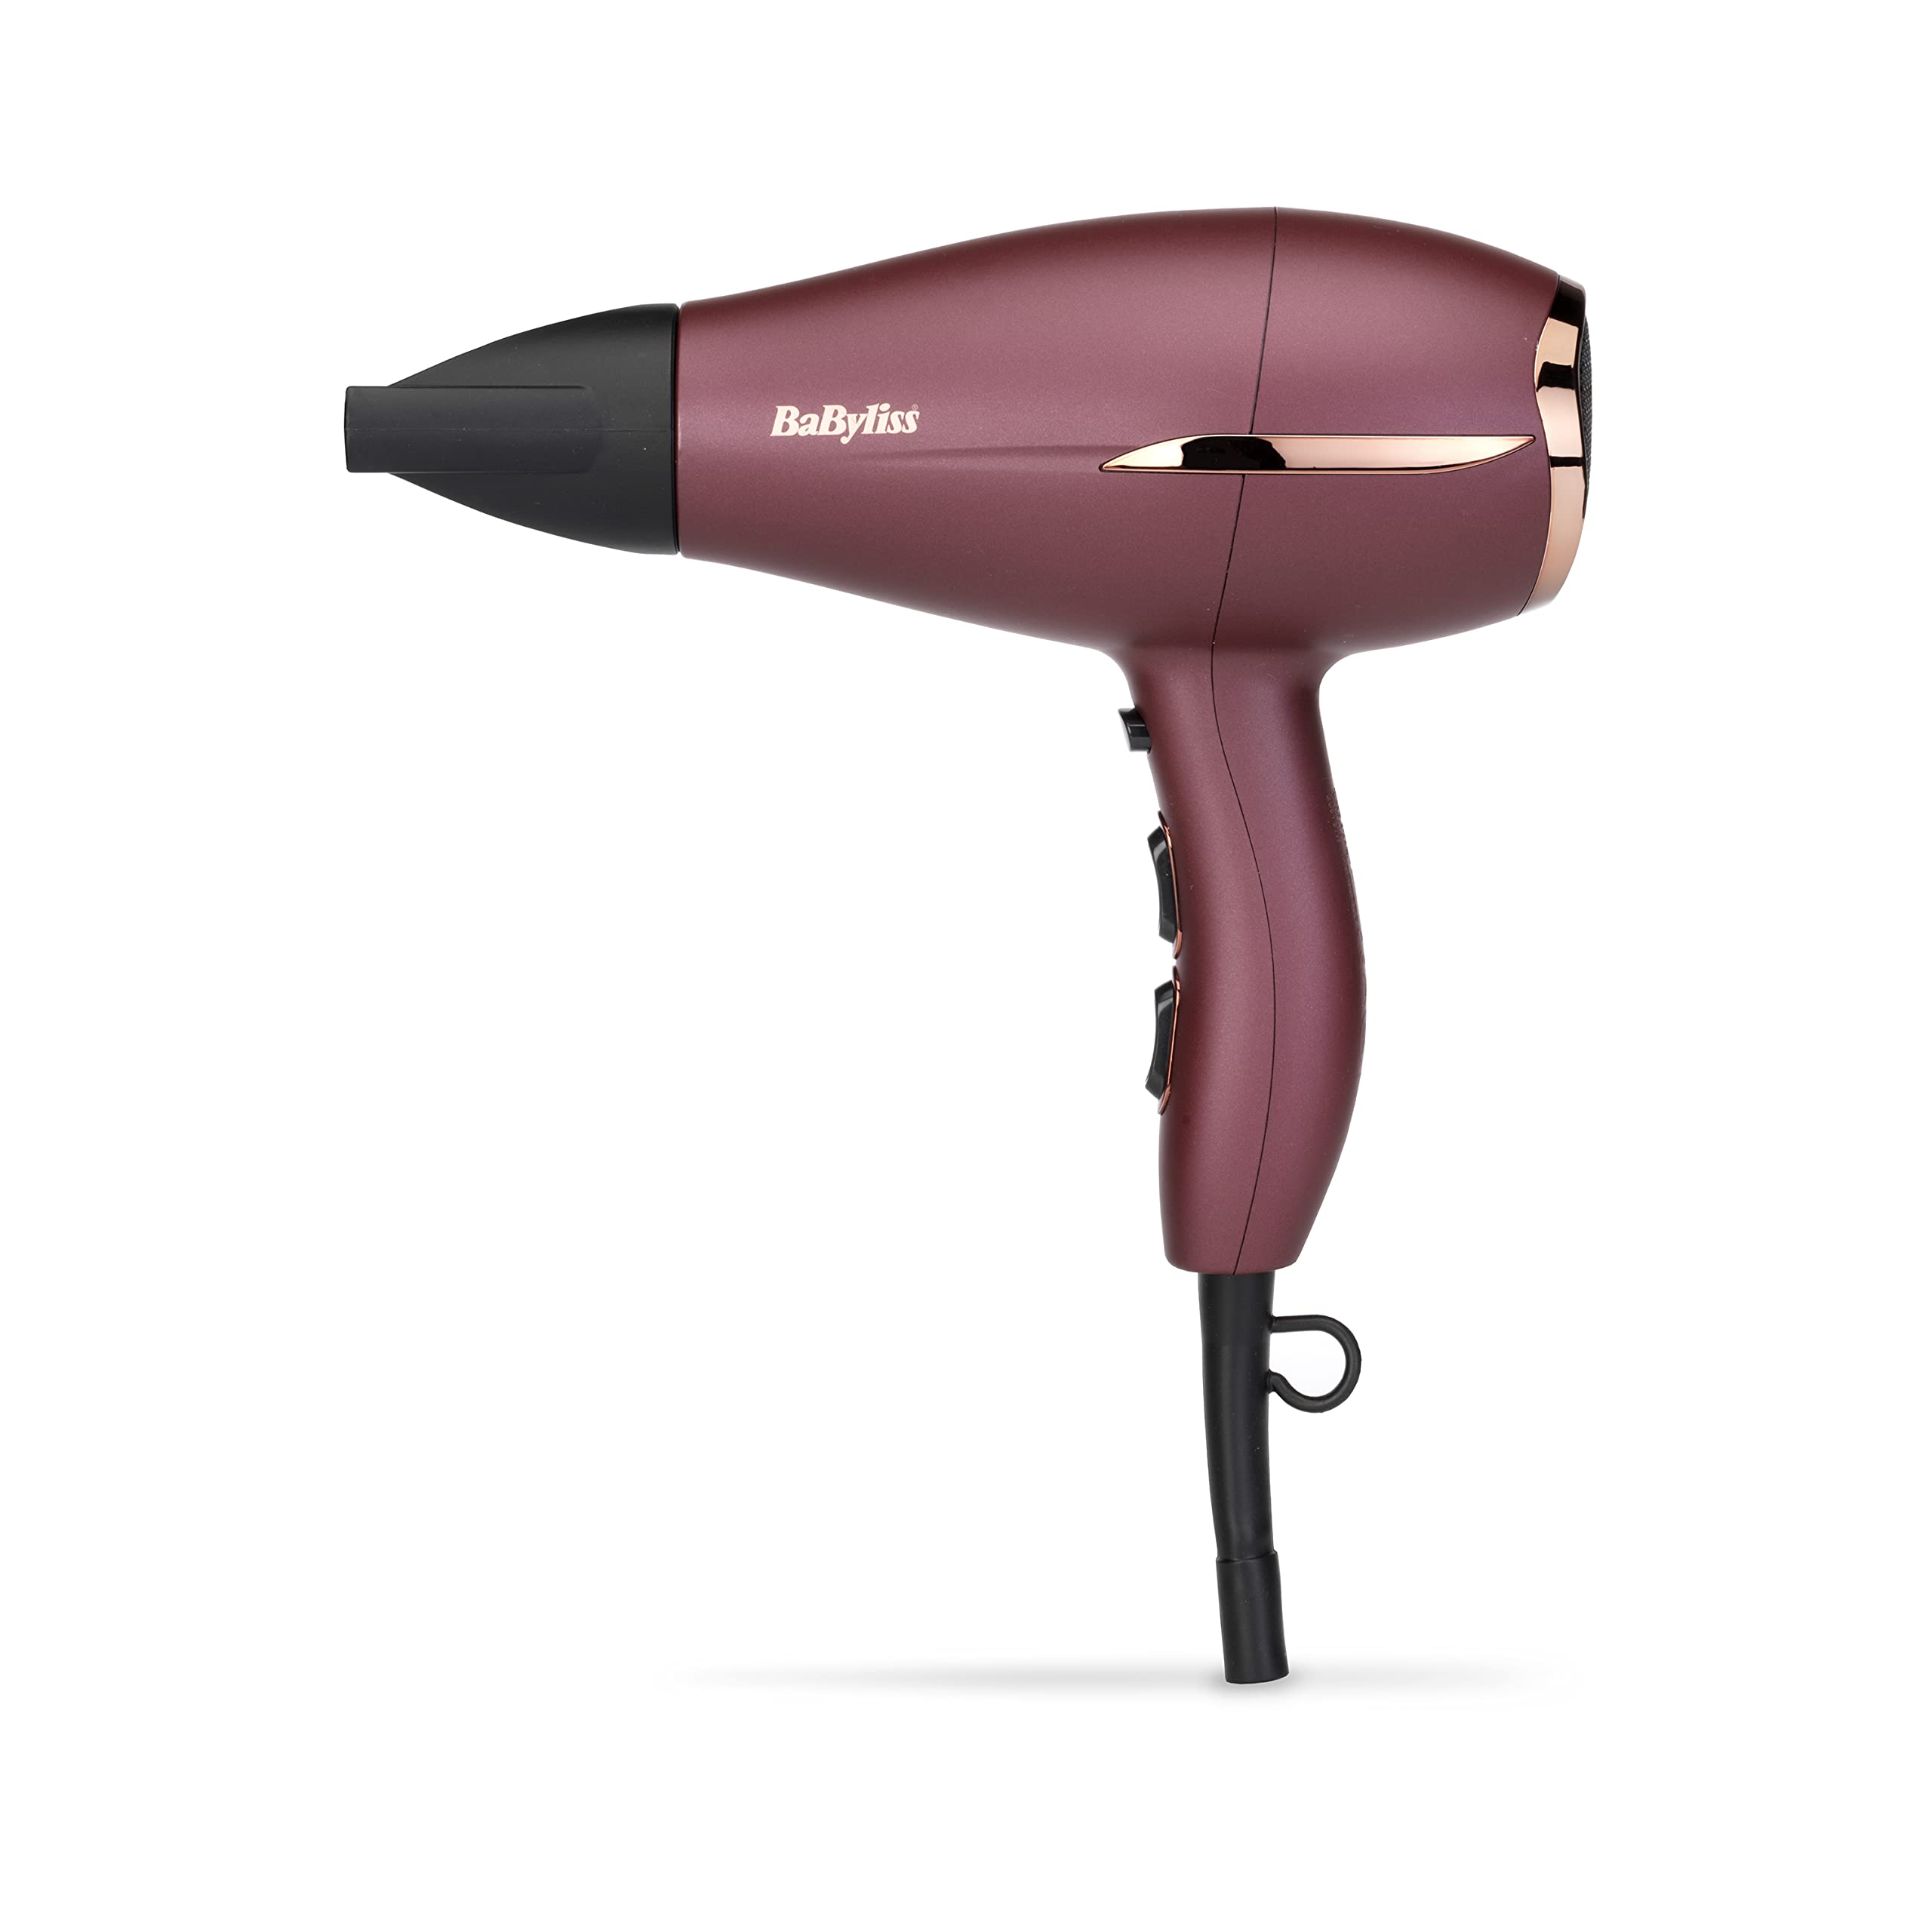 BaByliss Berry Crush Dryer | Advanced Airflow Technology Gives A Powerful, Controlled Airstream| 3 Heats And 2 Speed Settings For Controlled Drying And Styling|lightweight | 5753PSDE(Burgundy)